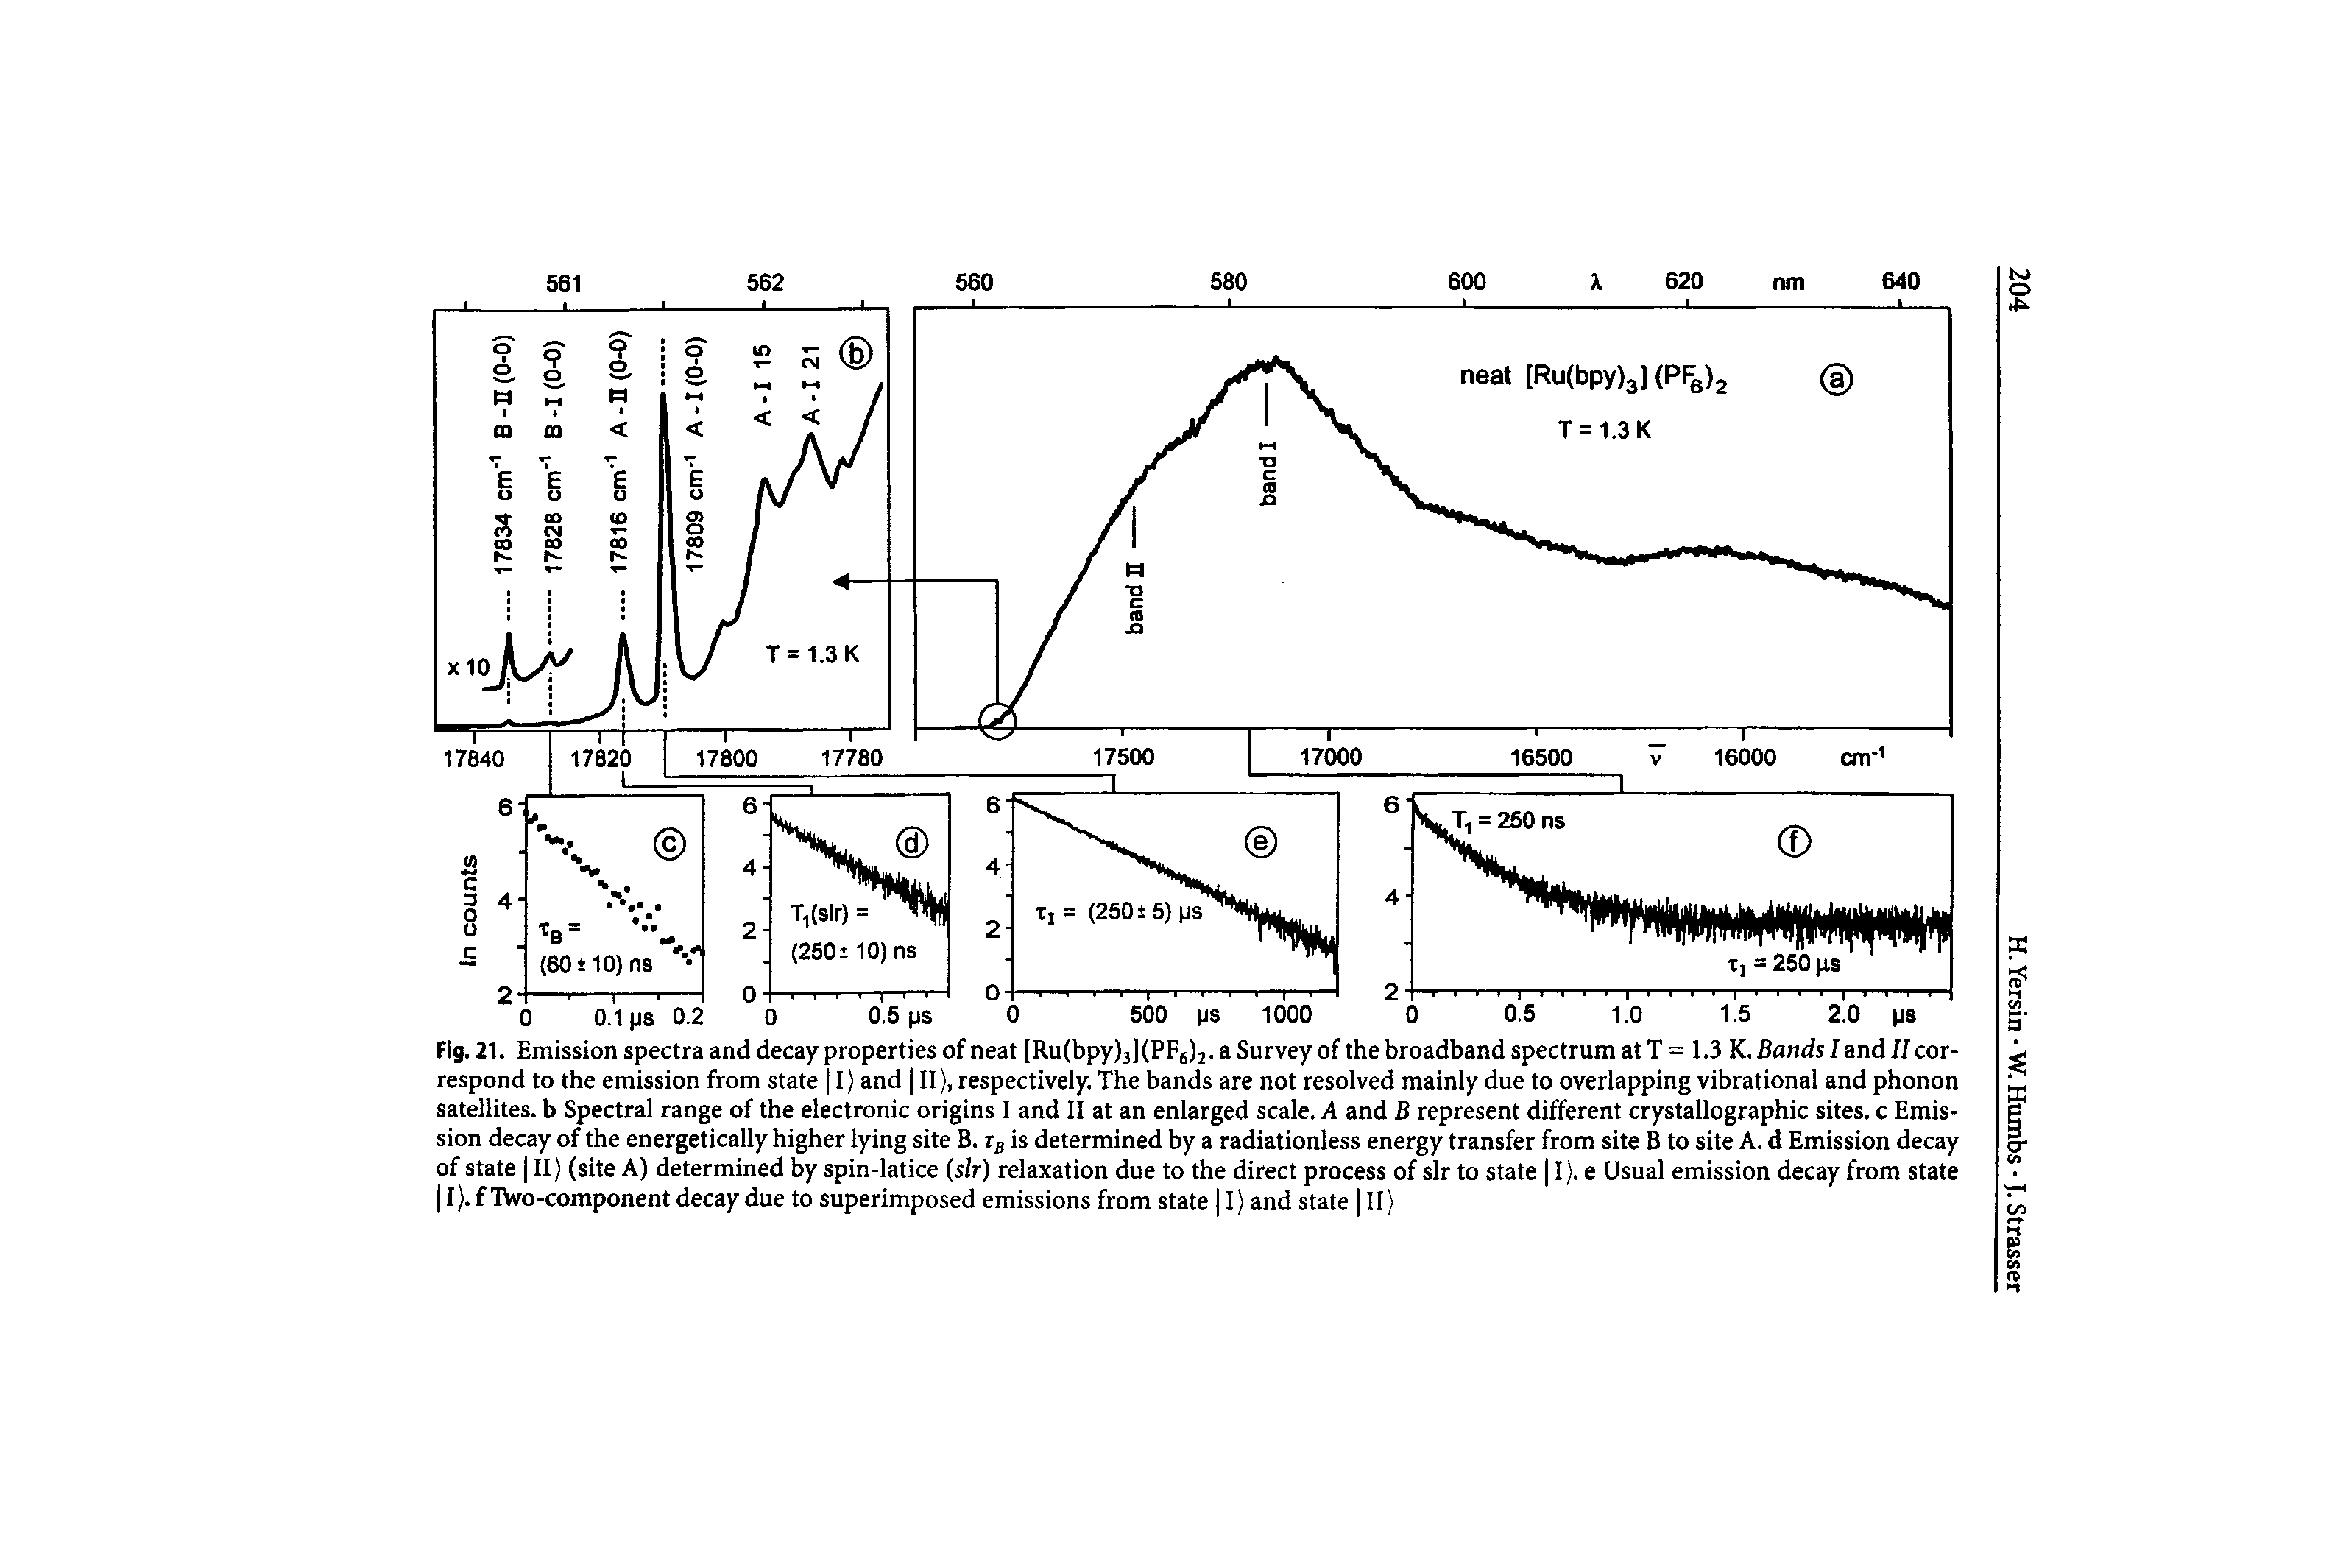 Fig. 21. Emission spectra and decay properties of neat [Ru(bpy)3)(PF()2. a Survey of the broadband spectrum at T = 1.3 K. Bands I and II correspond to the emission from state 11) and II), respectively. The bands are not resolved mainly due to overlapping vibrational and phonon satellites, b Spectral range of the electronic origins I and II at an enlarged scale. A and B represent different crystallographic sites, c Emission decay of the energetically higher lying site B. Tg is determined by a radiationless energy transfer from site B to site A. d Emission decay of state III) (site A) determined by spin-latice (sir) relaxation due to the direct process of sir to state 11), e Usual emission decay from state 11). f IWo-component decay due to superimposed emissions from state 11) and state 111 >...